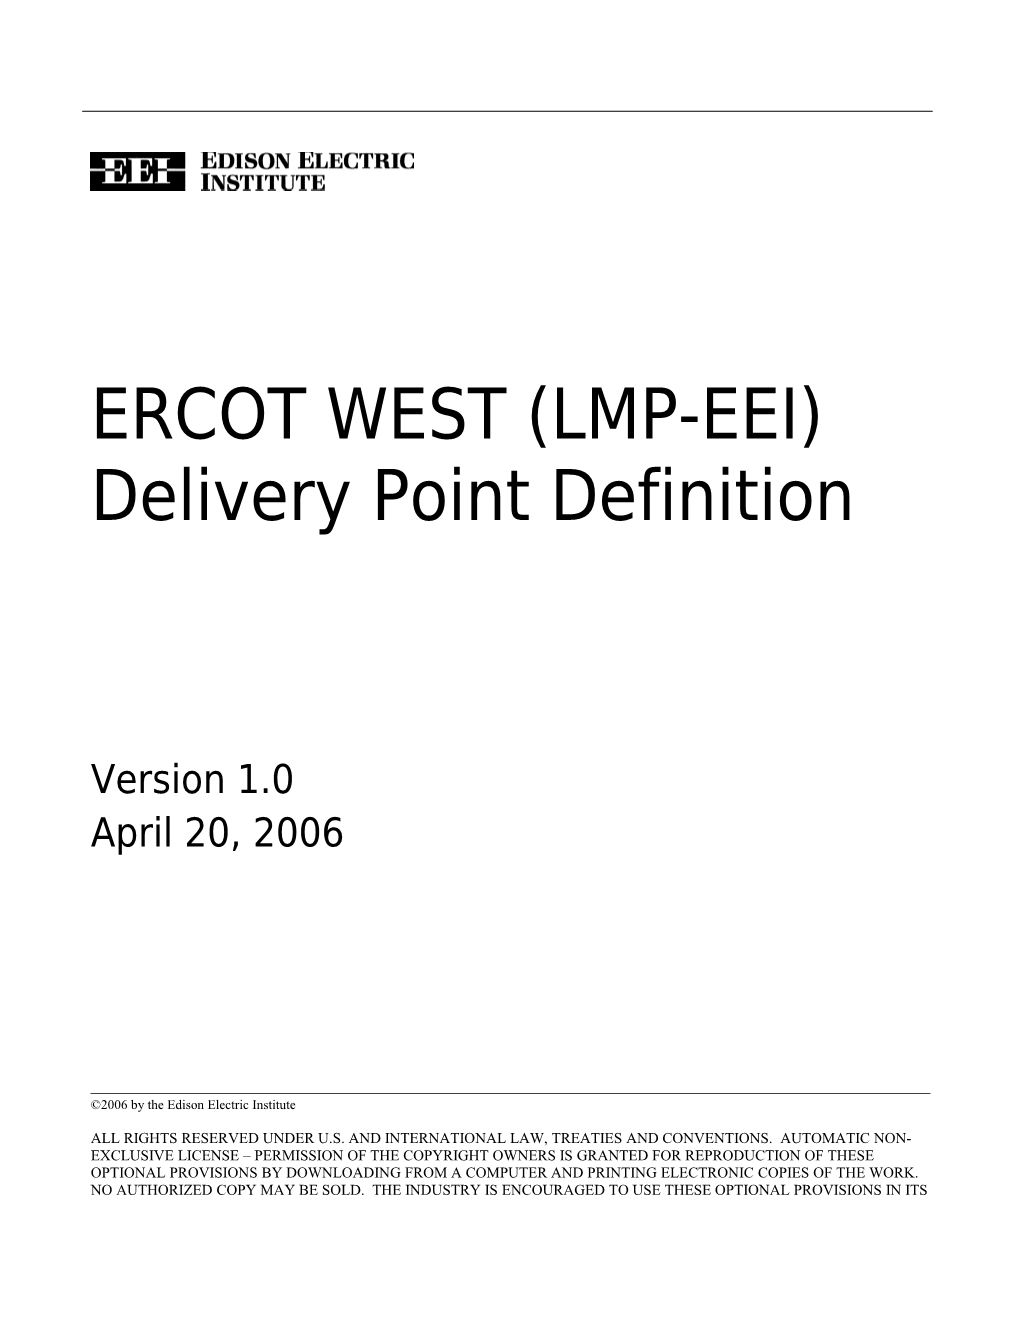 ERCOT West (LMP-EEI) Delivery Point Definition, Version 1.0, 4/20/06 2